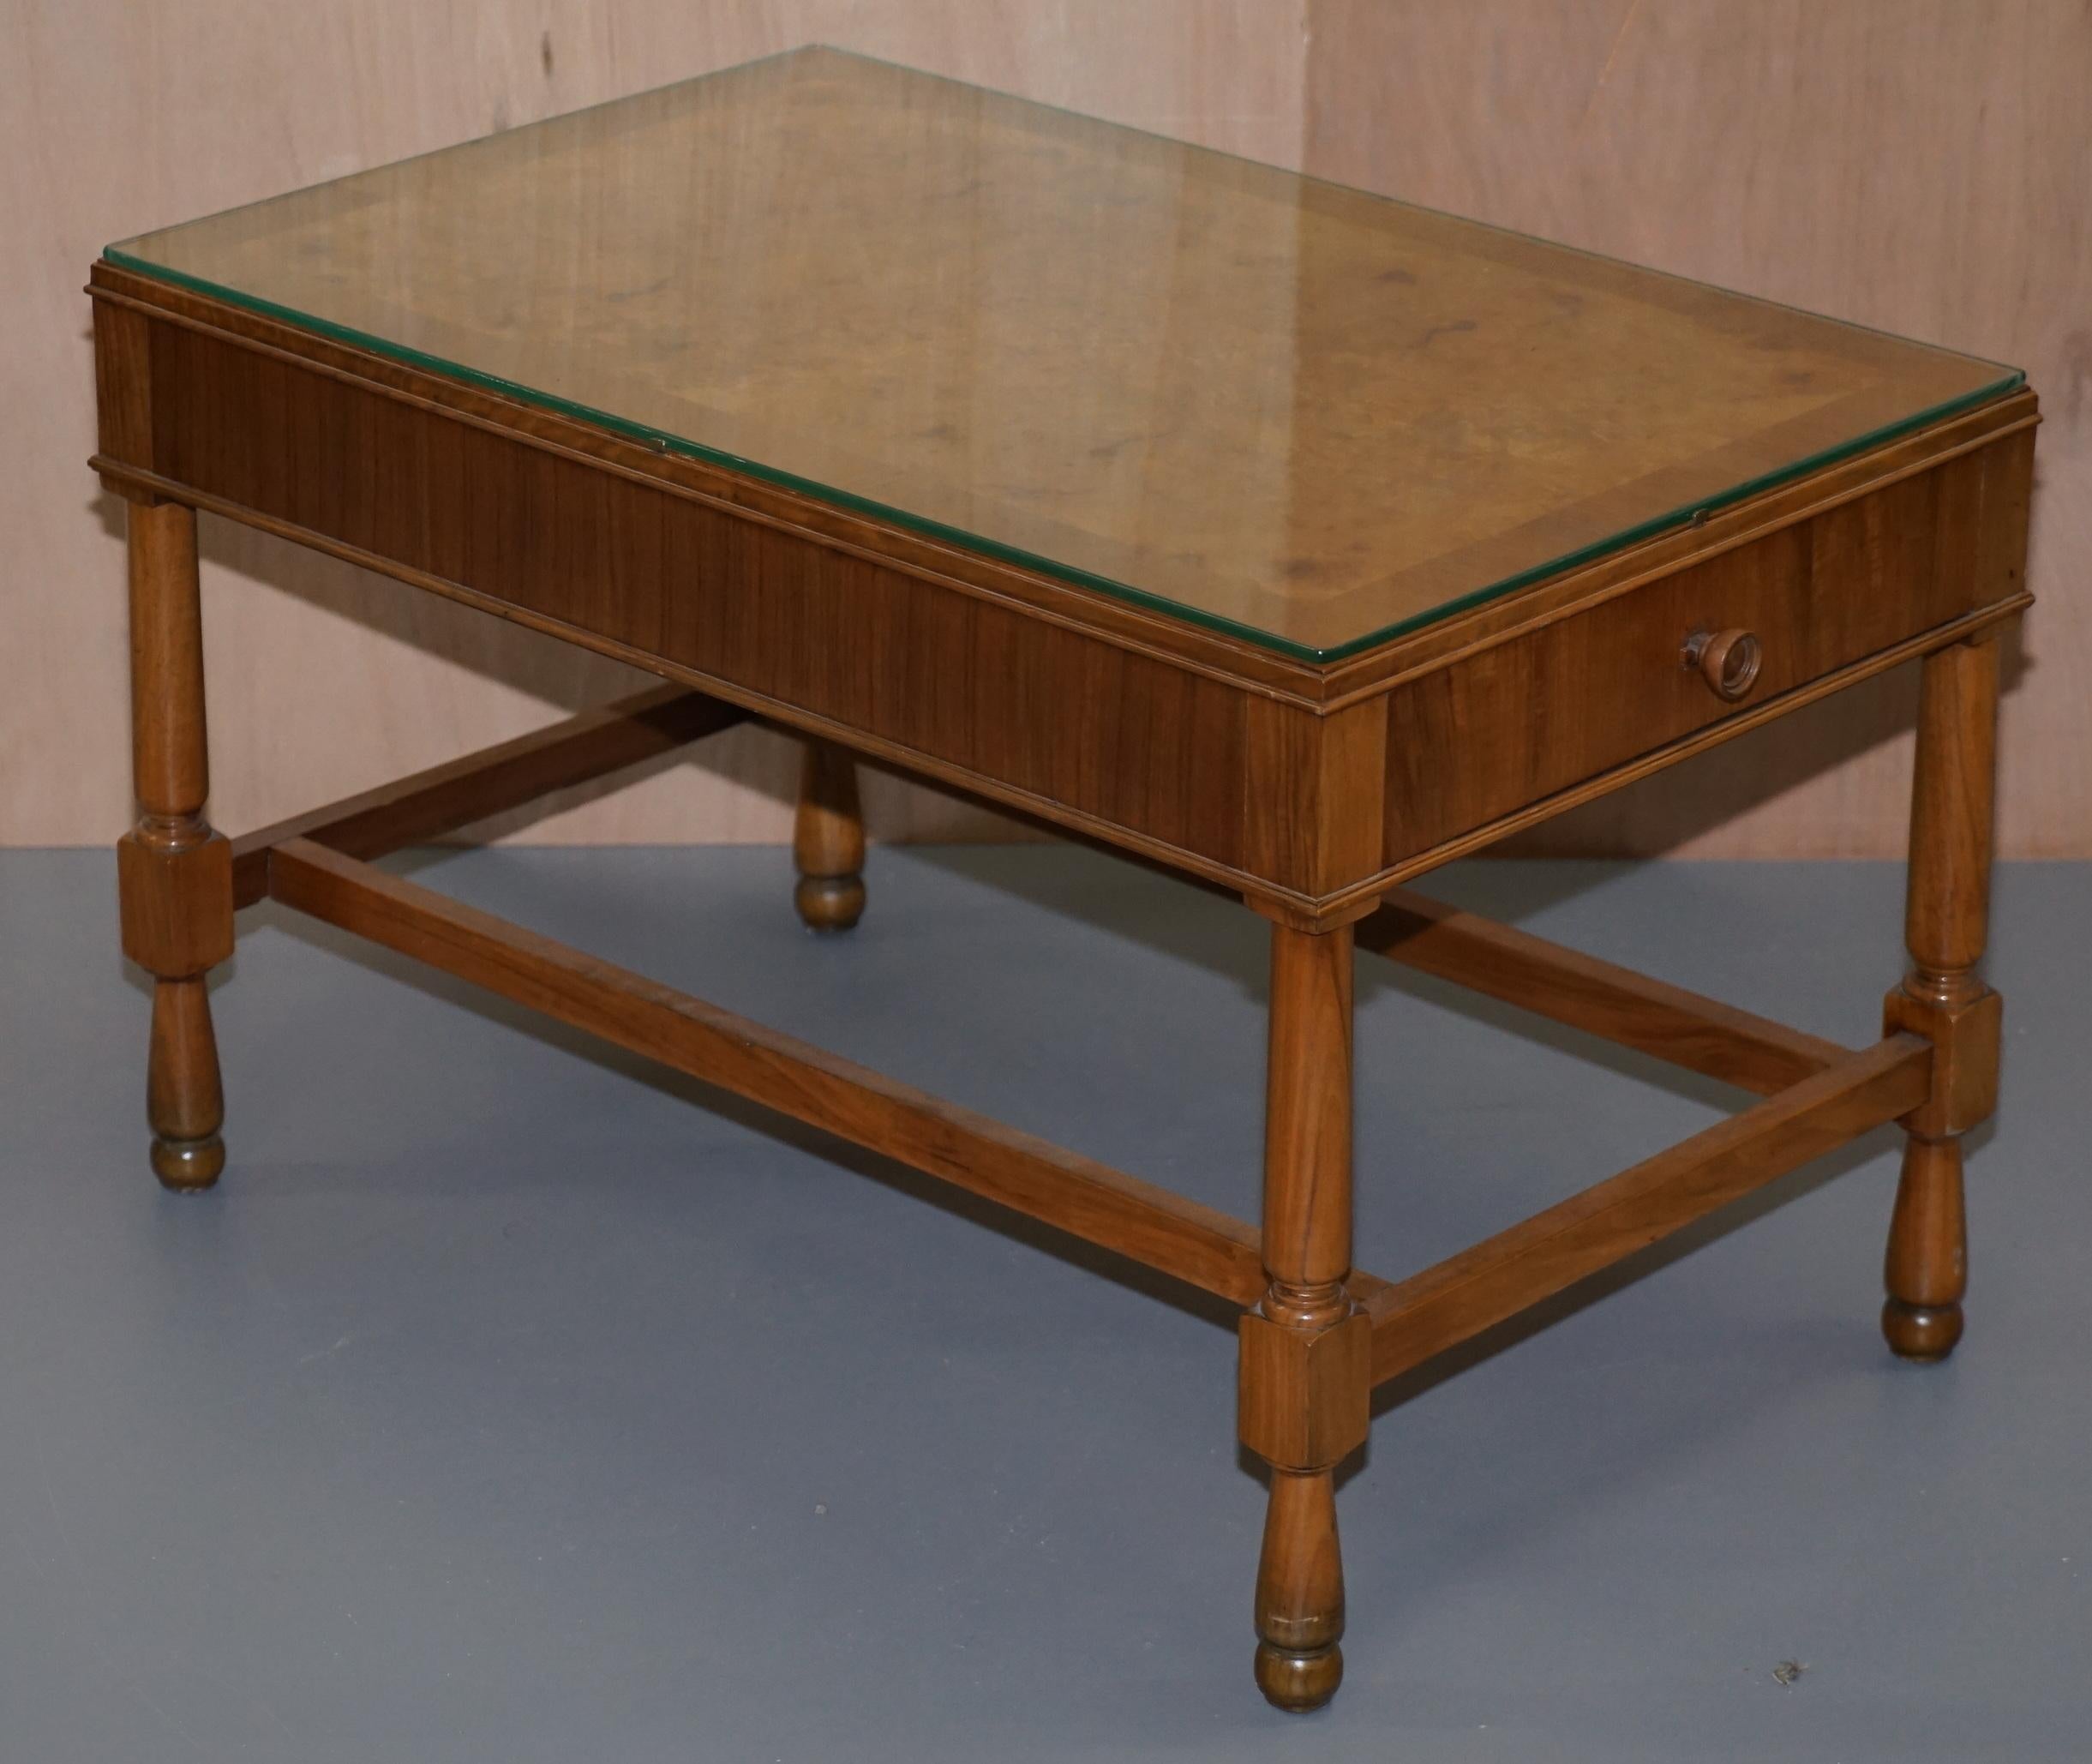 We are delighted to this stunning pair of vintage Burr Walnut side tables with glass tops and double drawers either end

A very good looking and versatile pair of side tables, I have never seen a pair this deep before and never seen any with